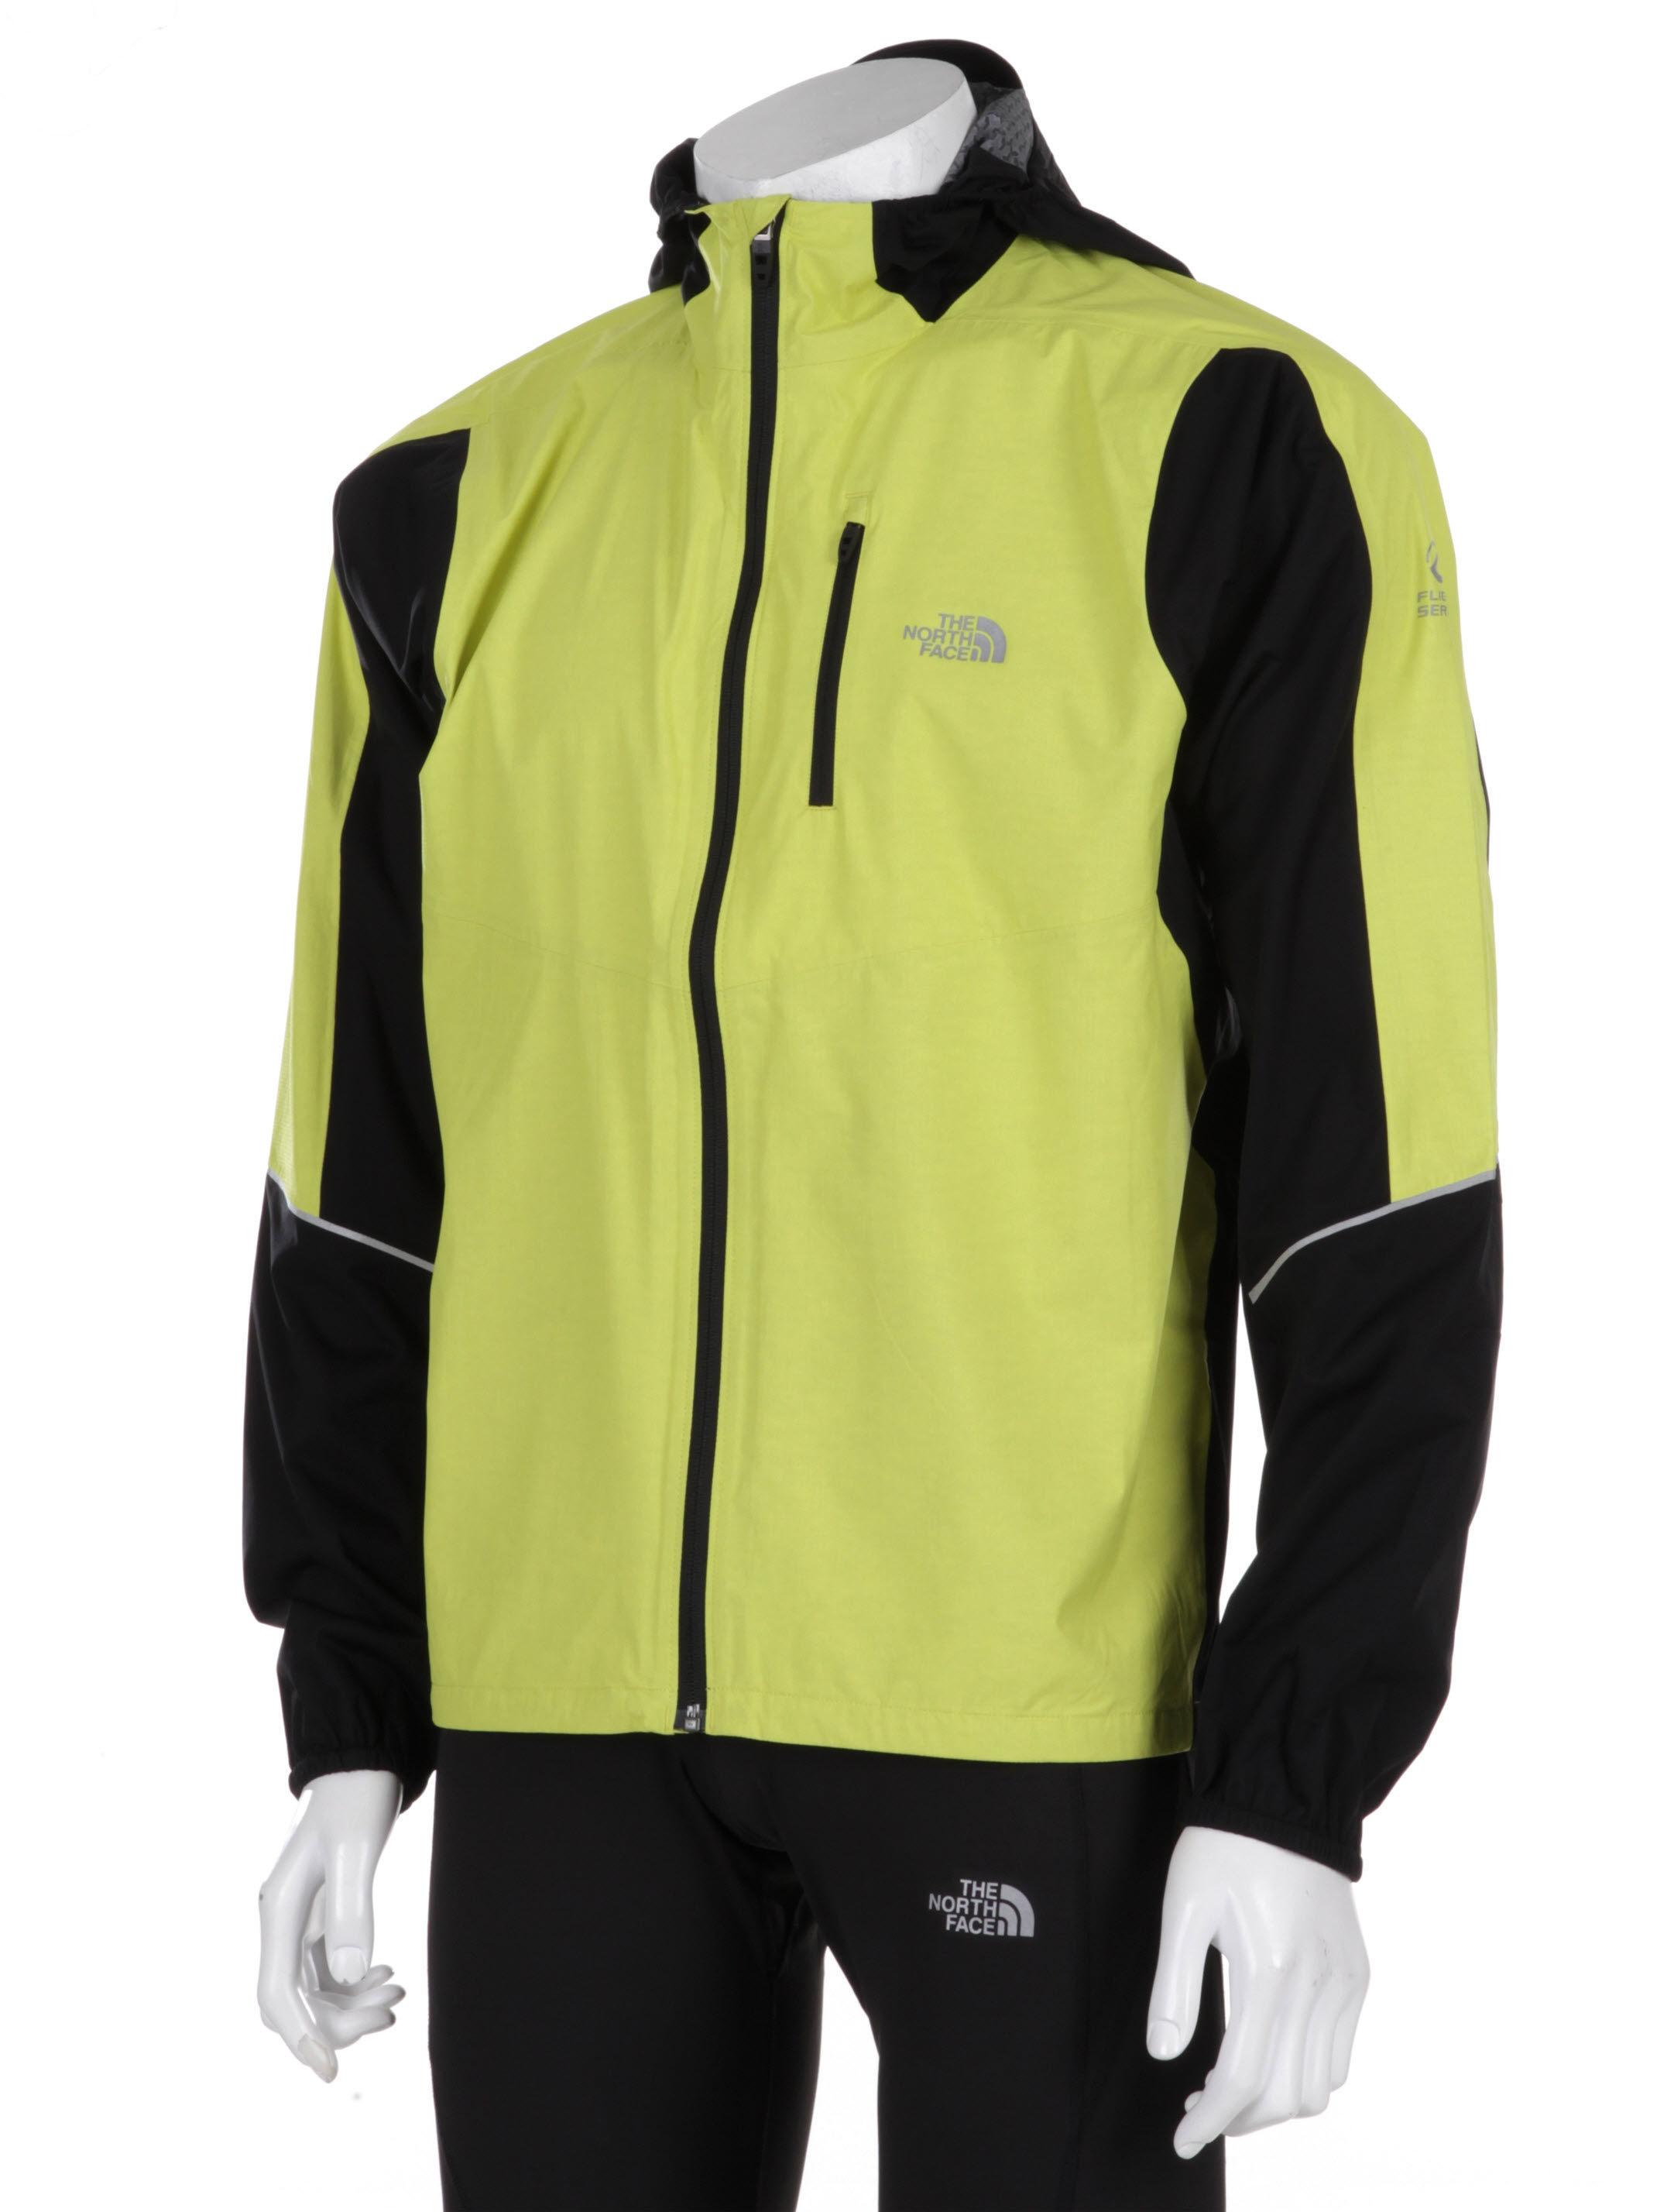 Foto Chaqueta The North Face - AK Storm Trail - Large Energy Yellow